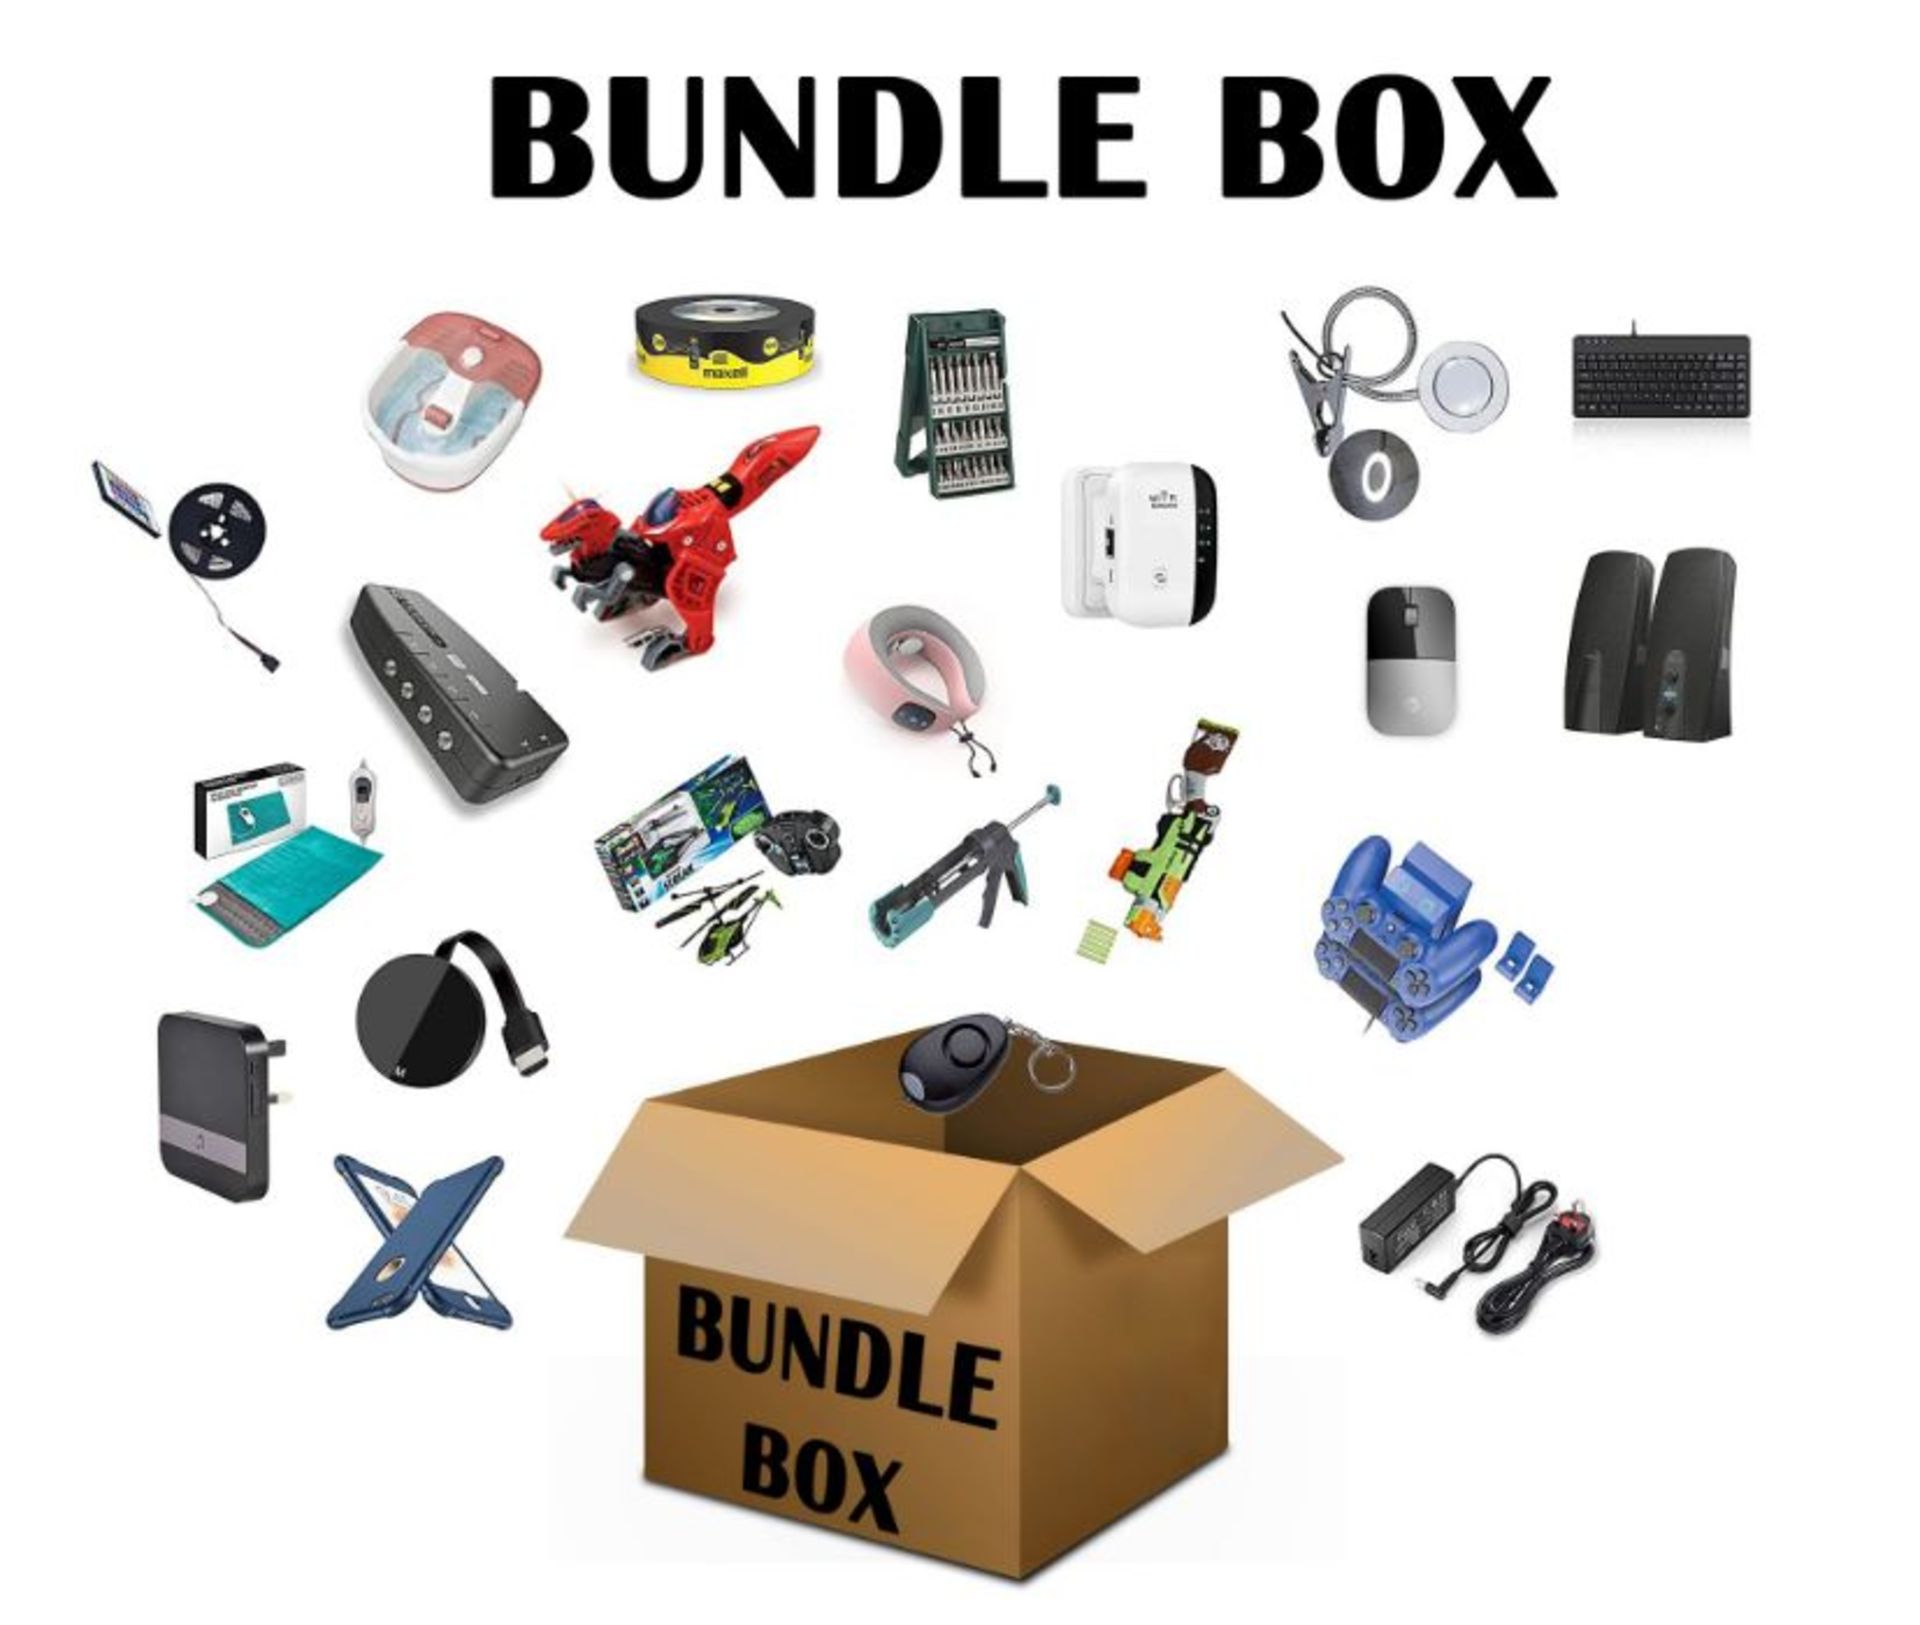 COMBINED RRP £1642.00 LOT TO CONTAIN 174 ASSORTED Tech Products: Amazon, OtterBox, Tec-Digi, Sc